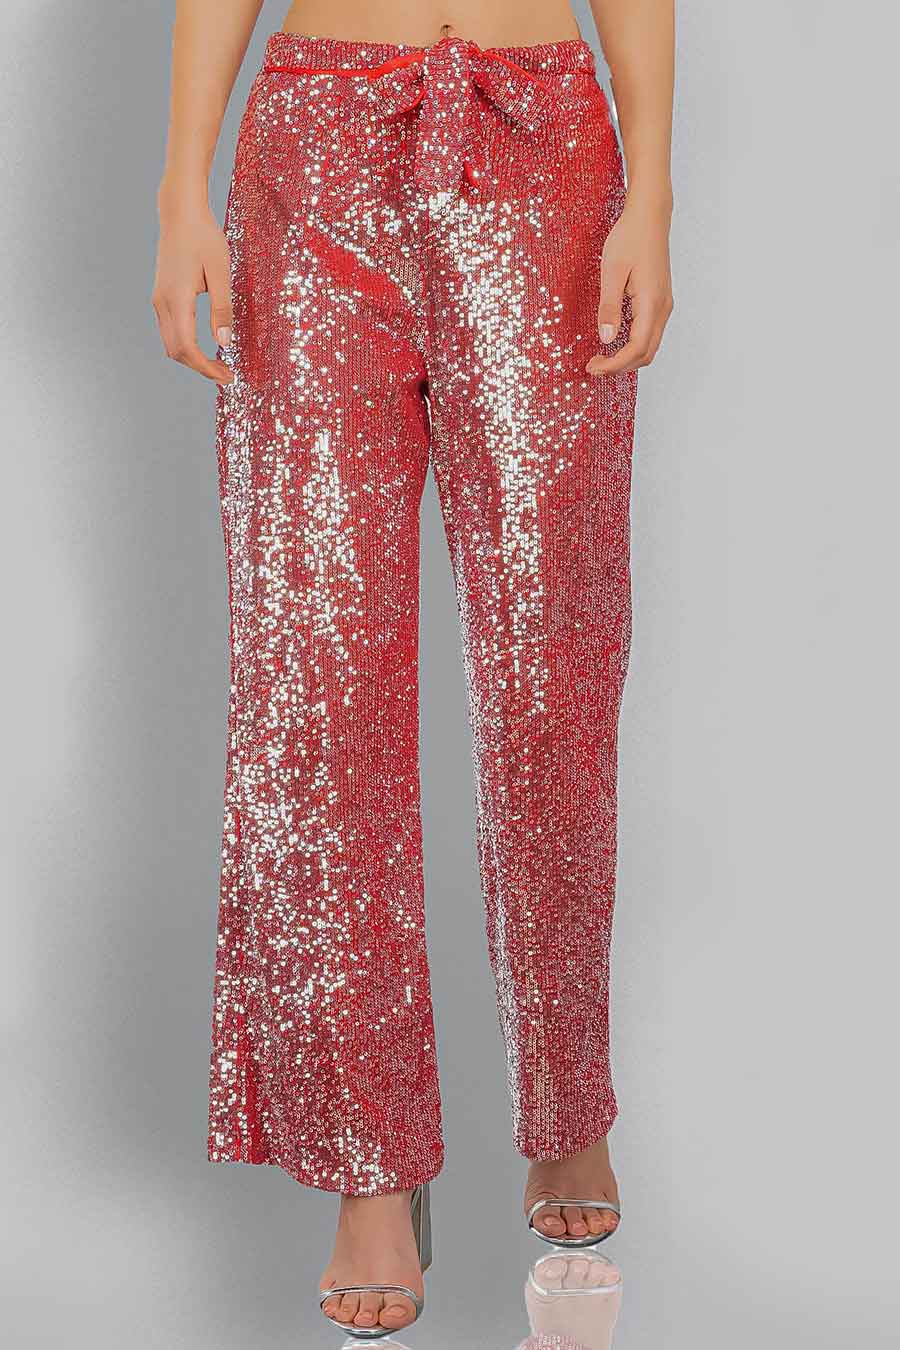 Red Sequined Pants